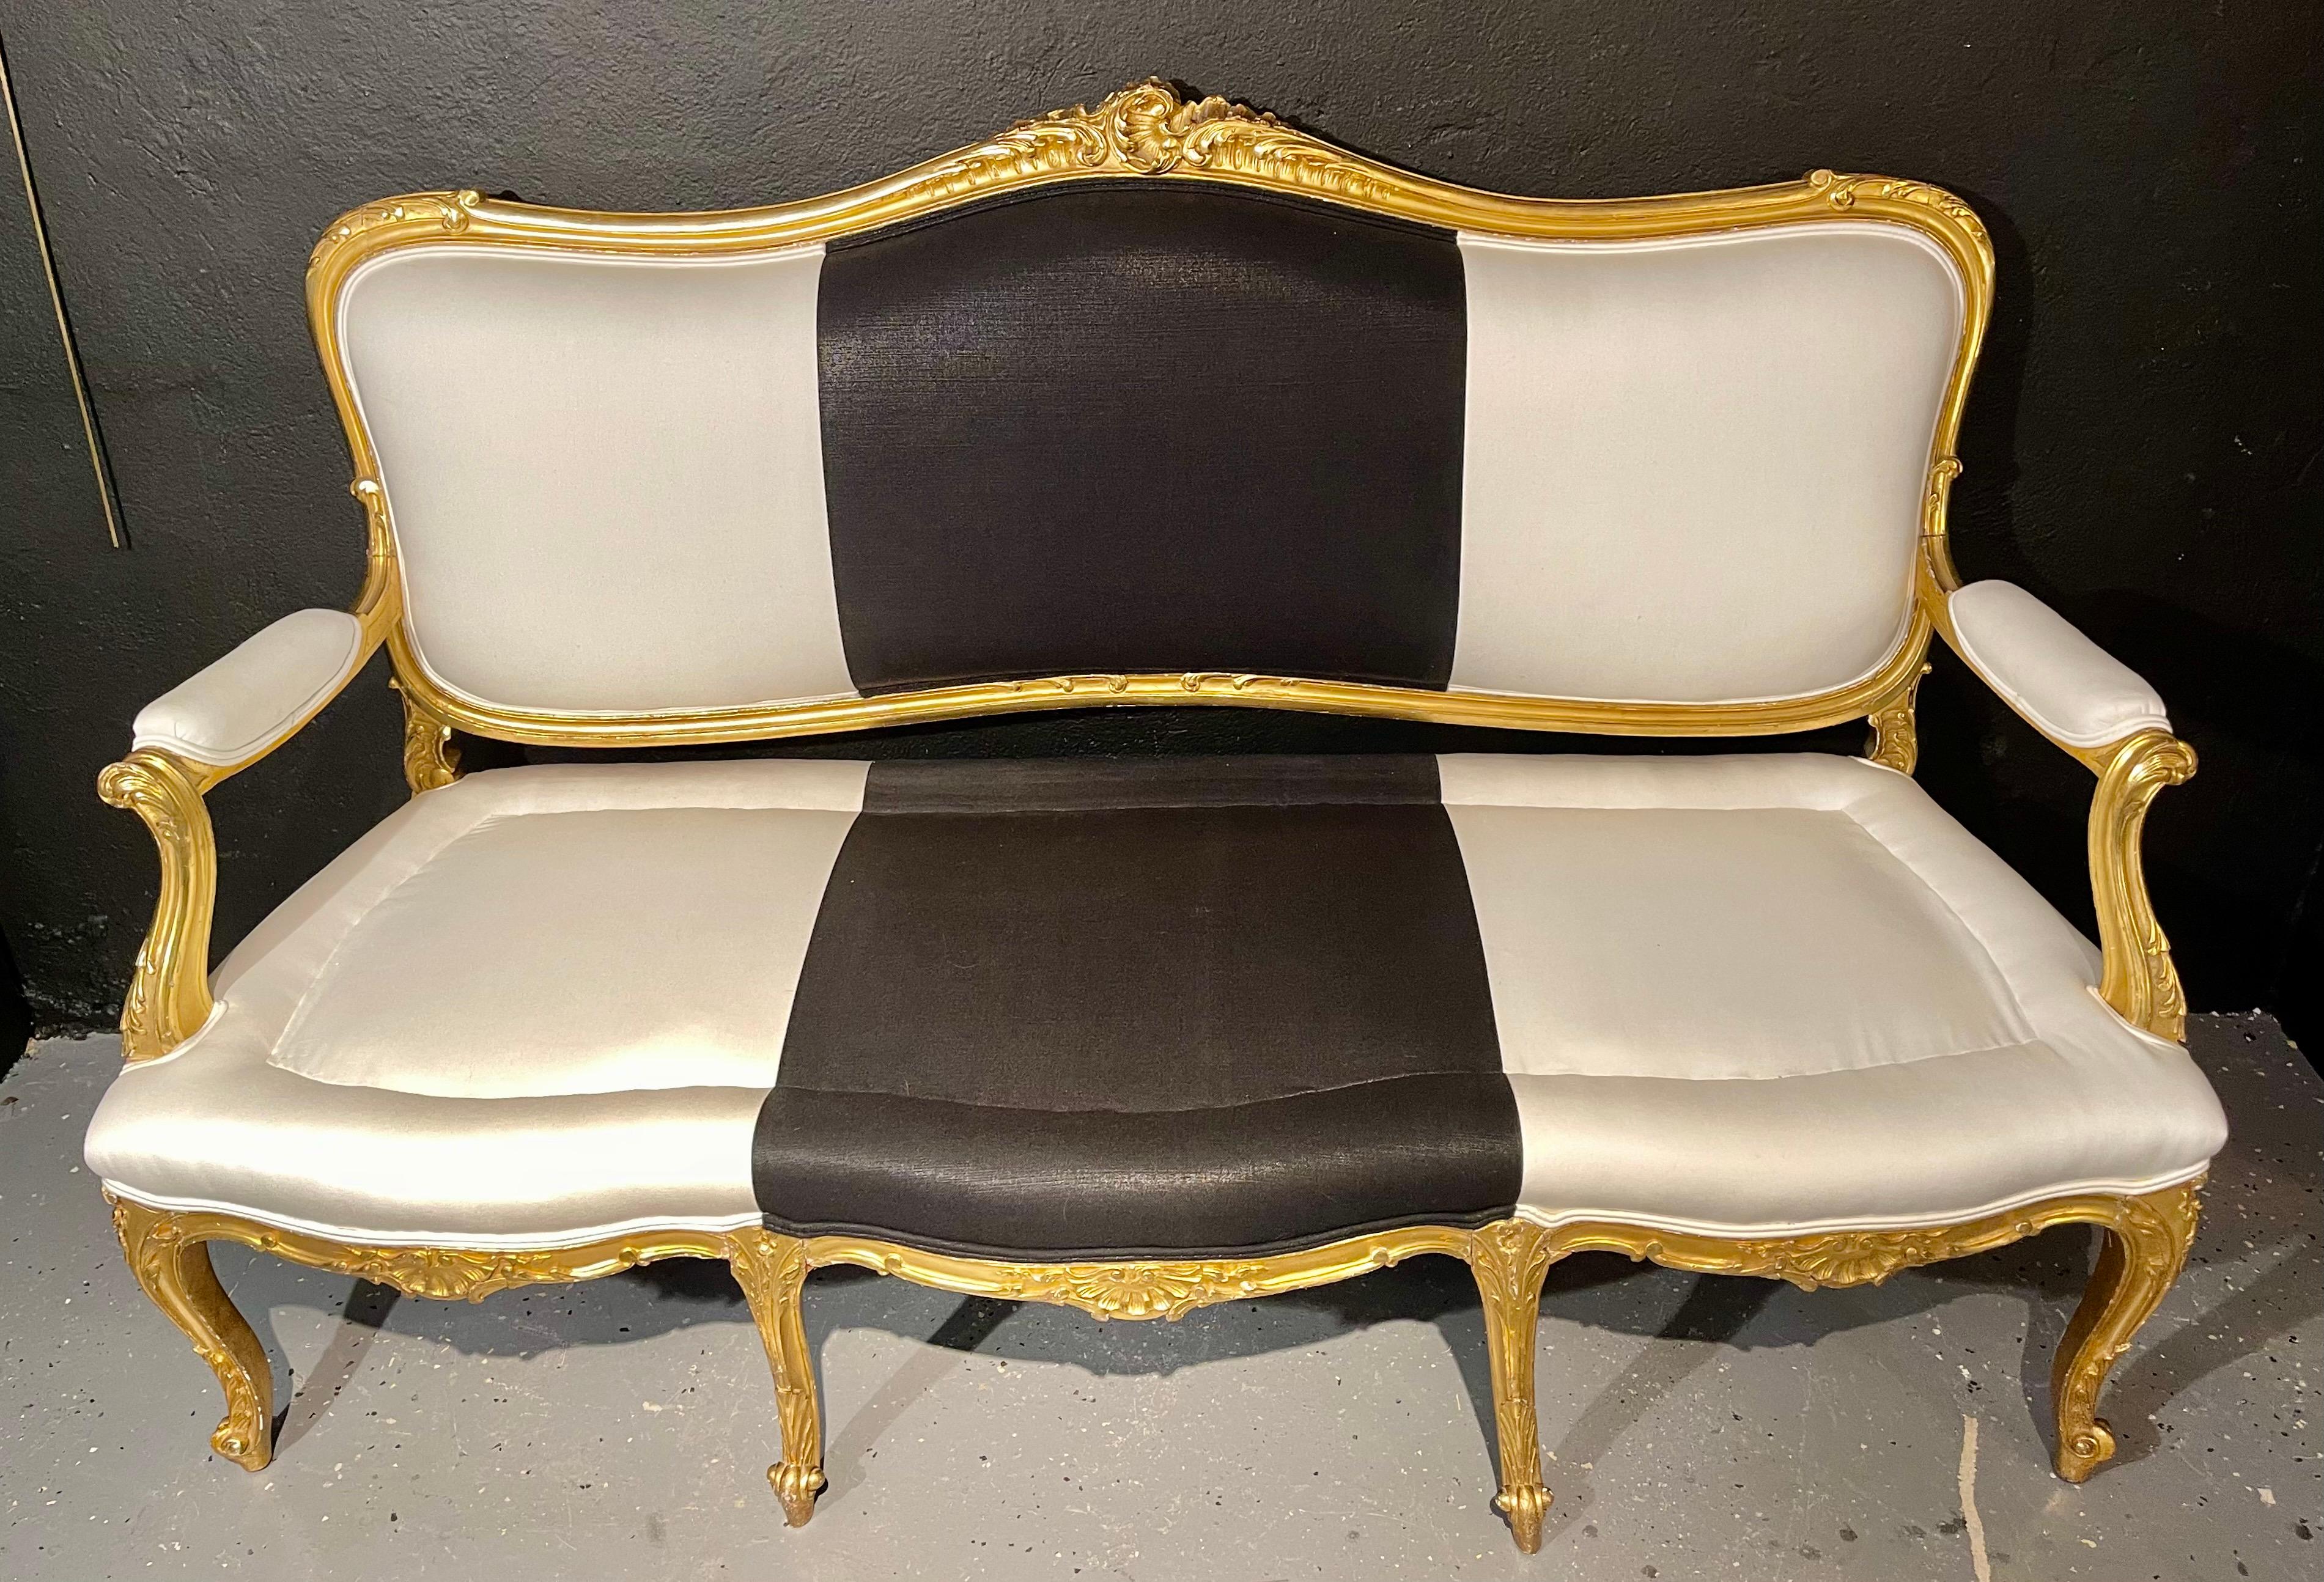 20th Century Water Gilt French Settee, Sofa or Loveseat, One of a Compatible Pair, 1930s For Sale